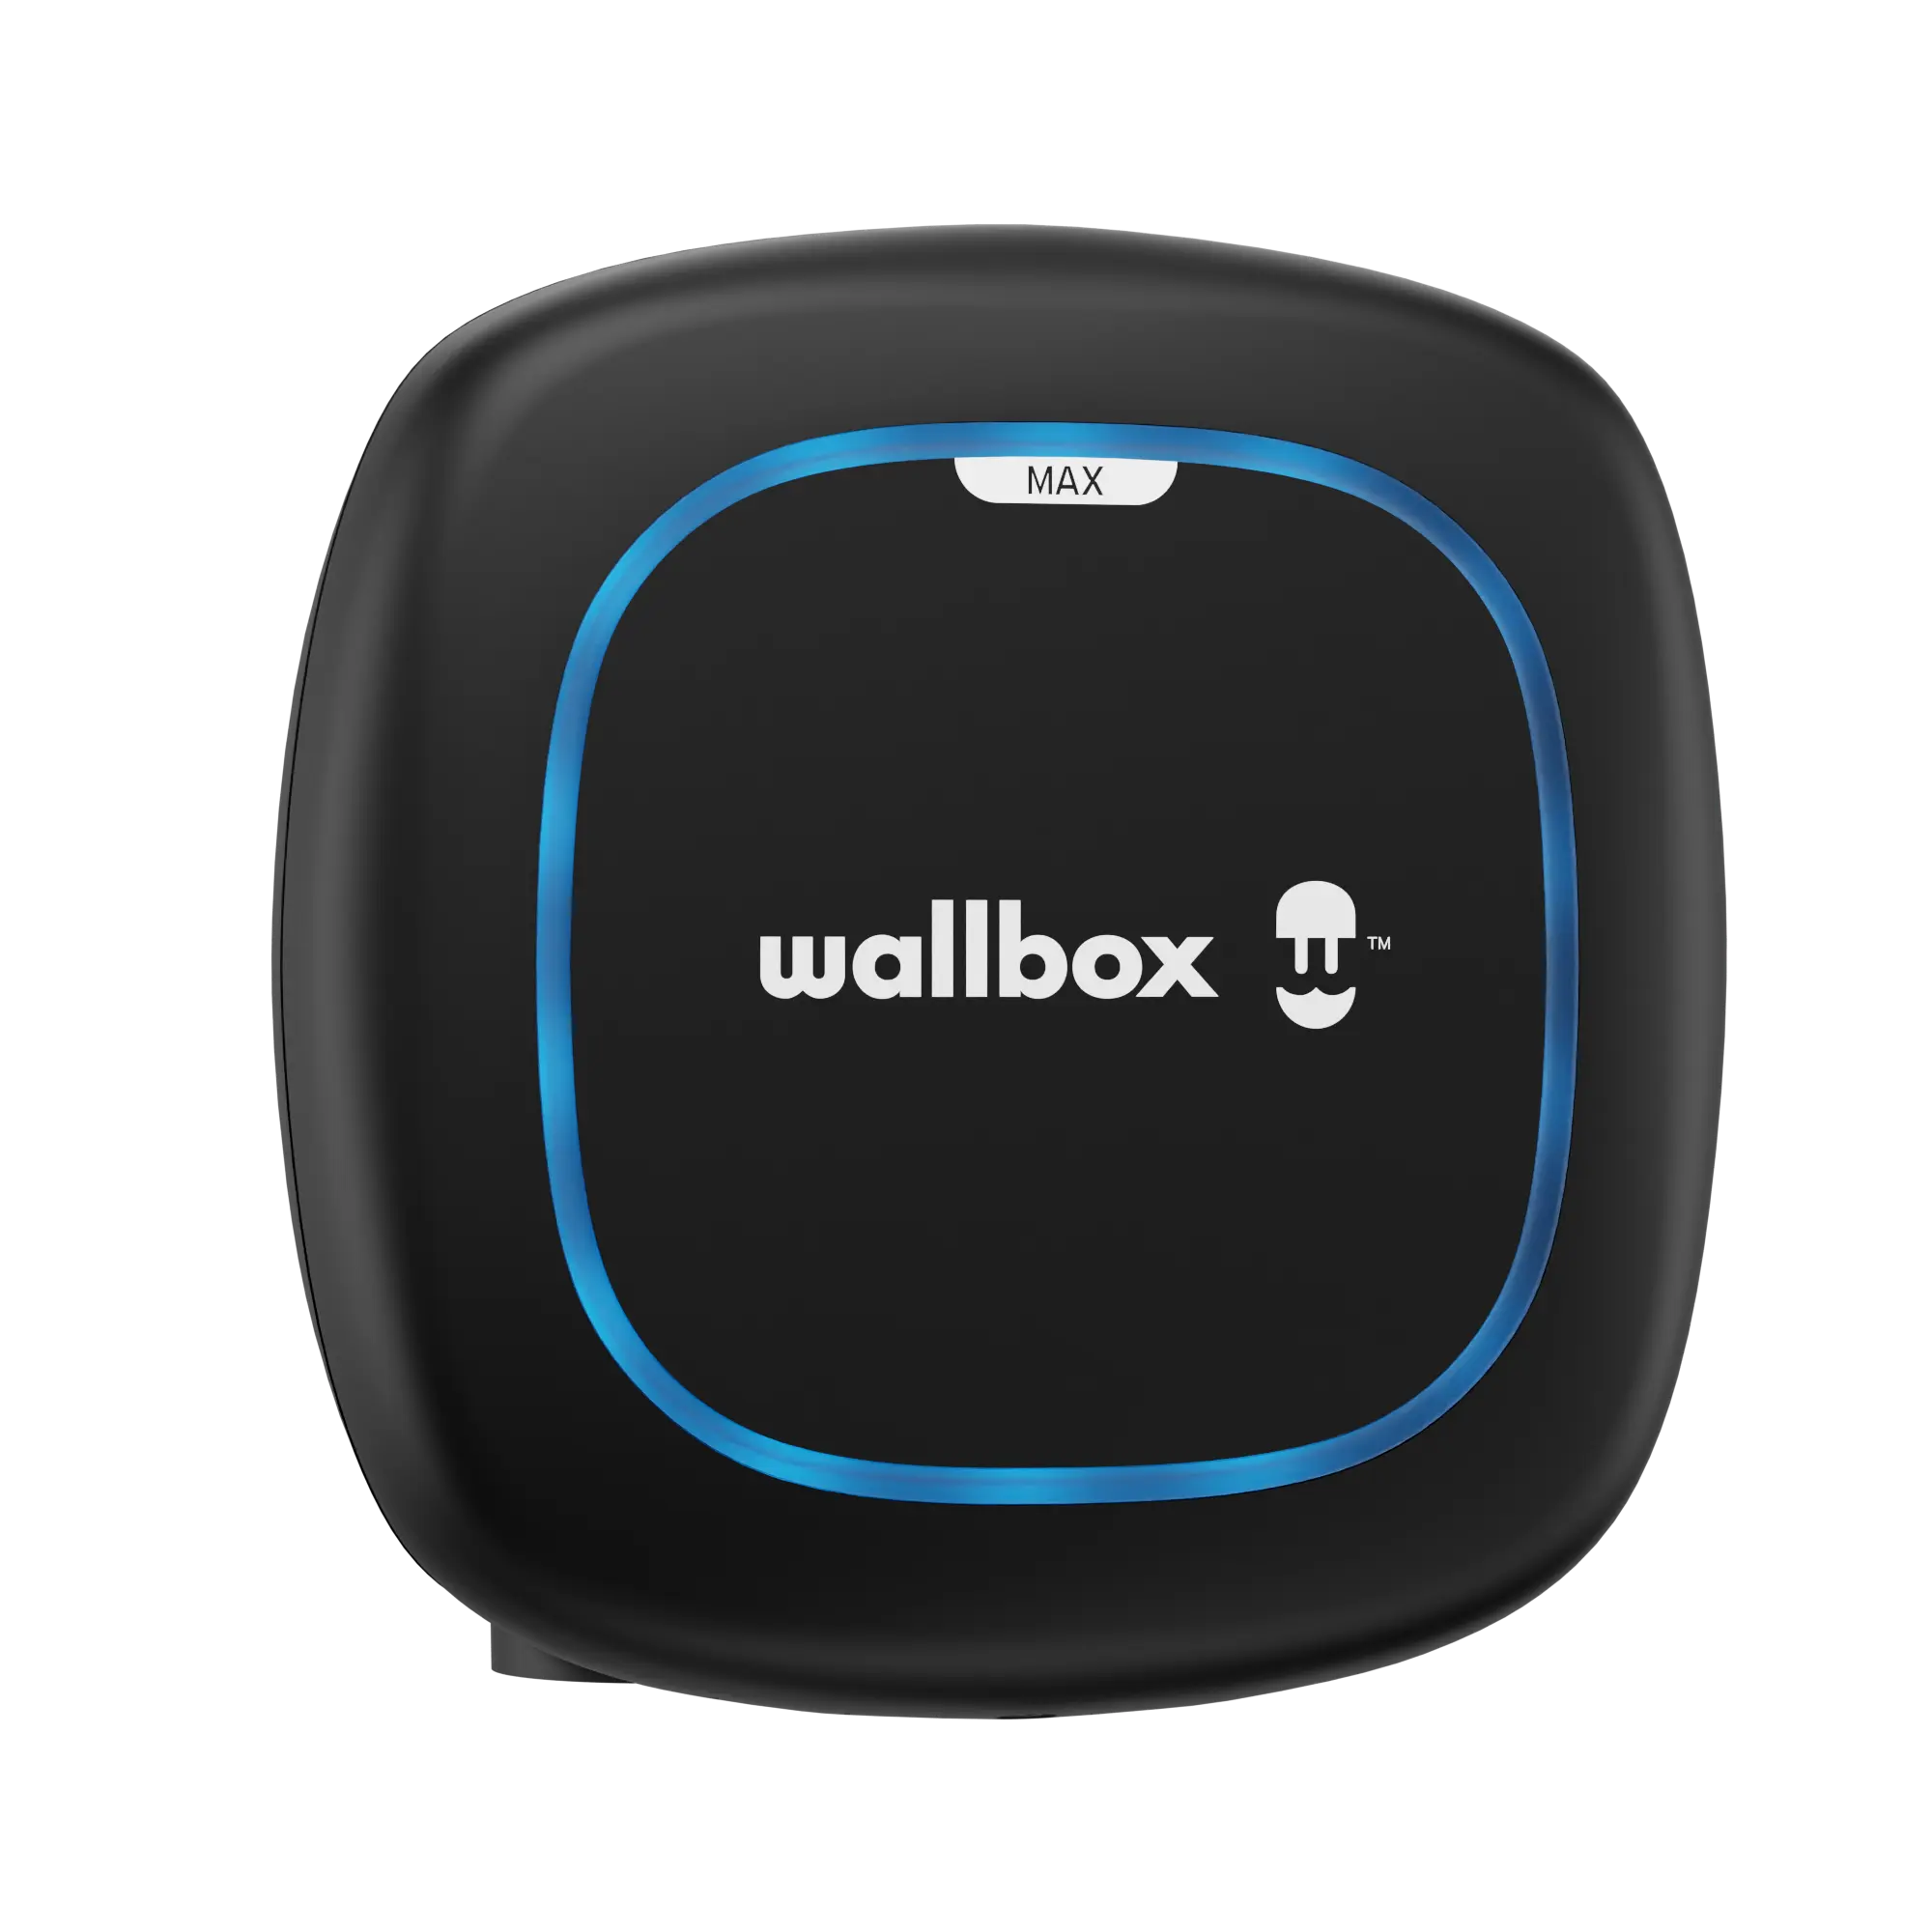 The Wallbox charger